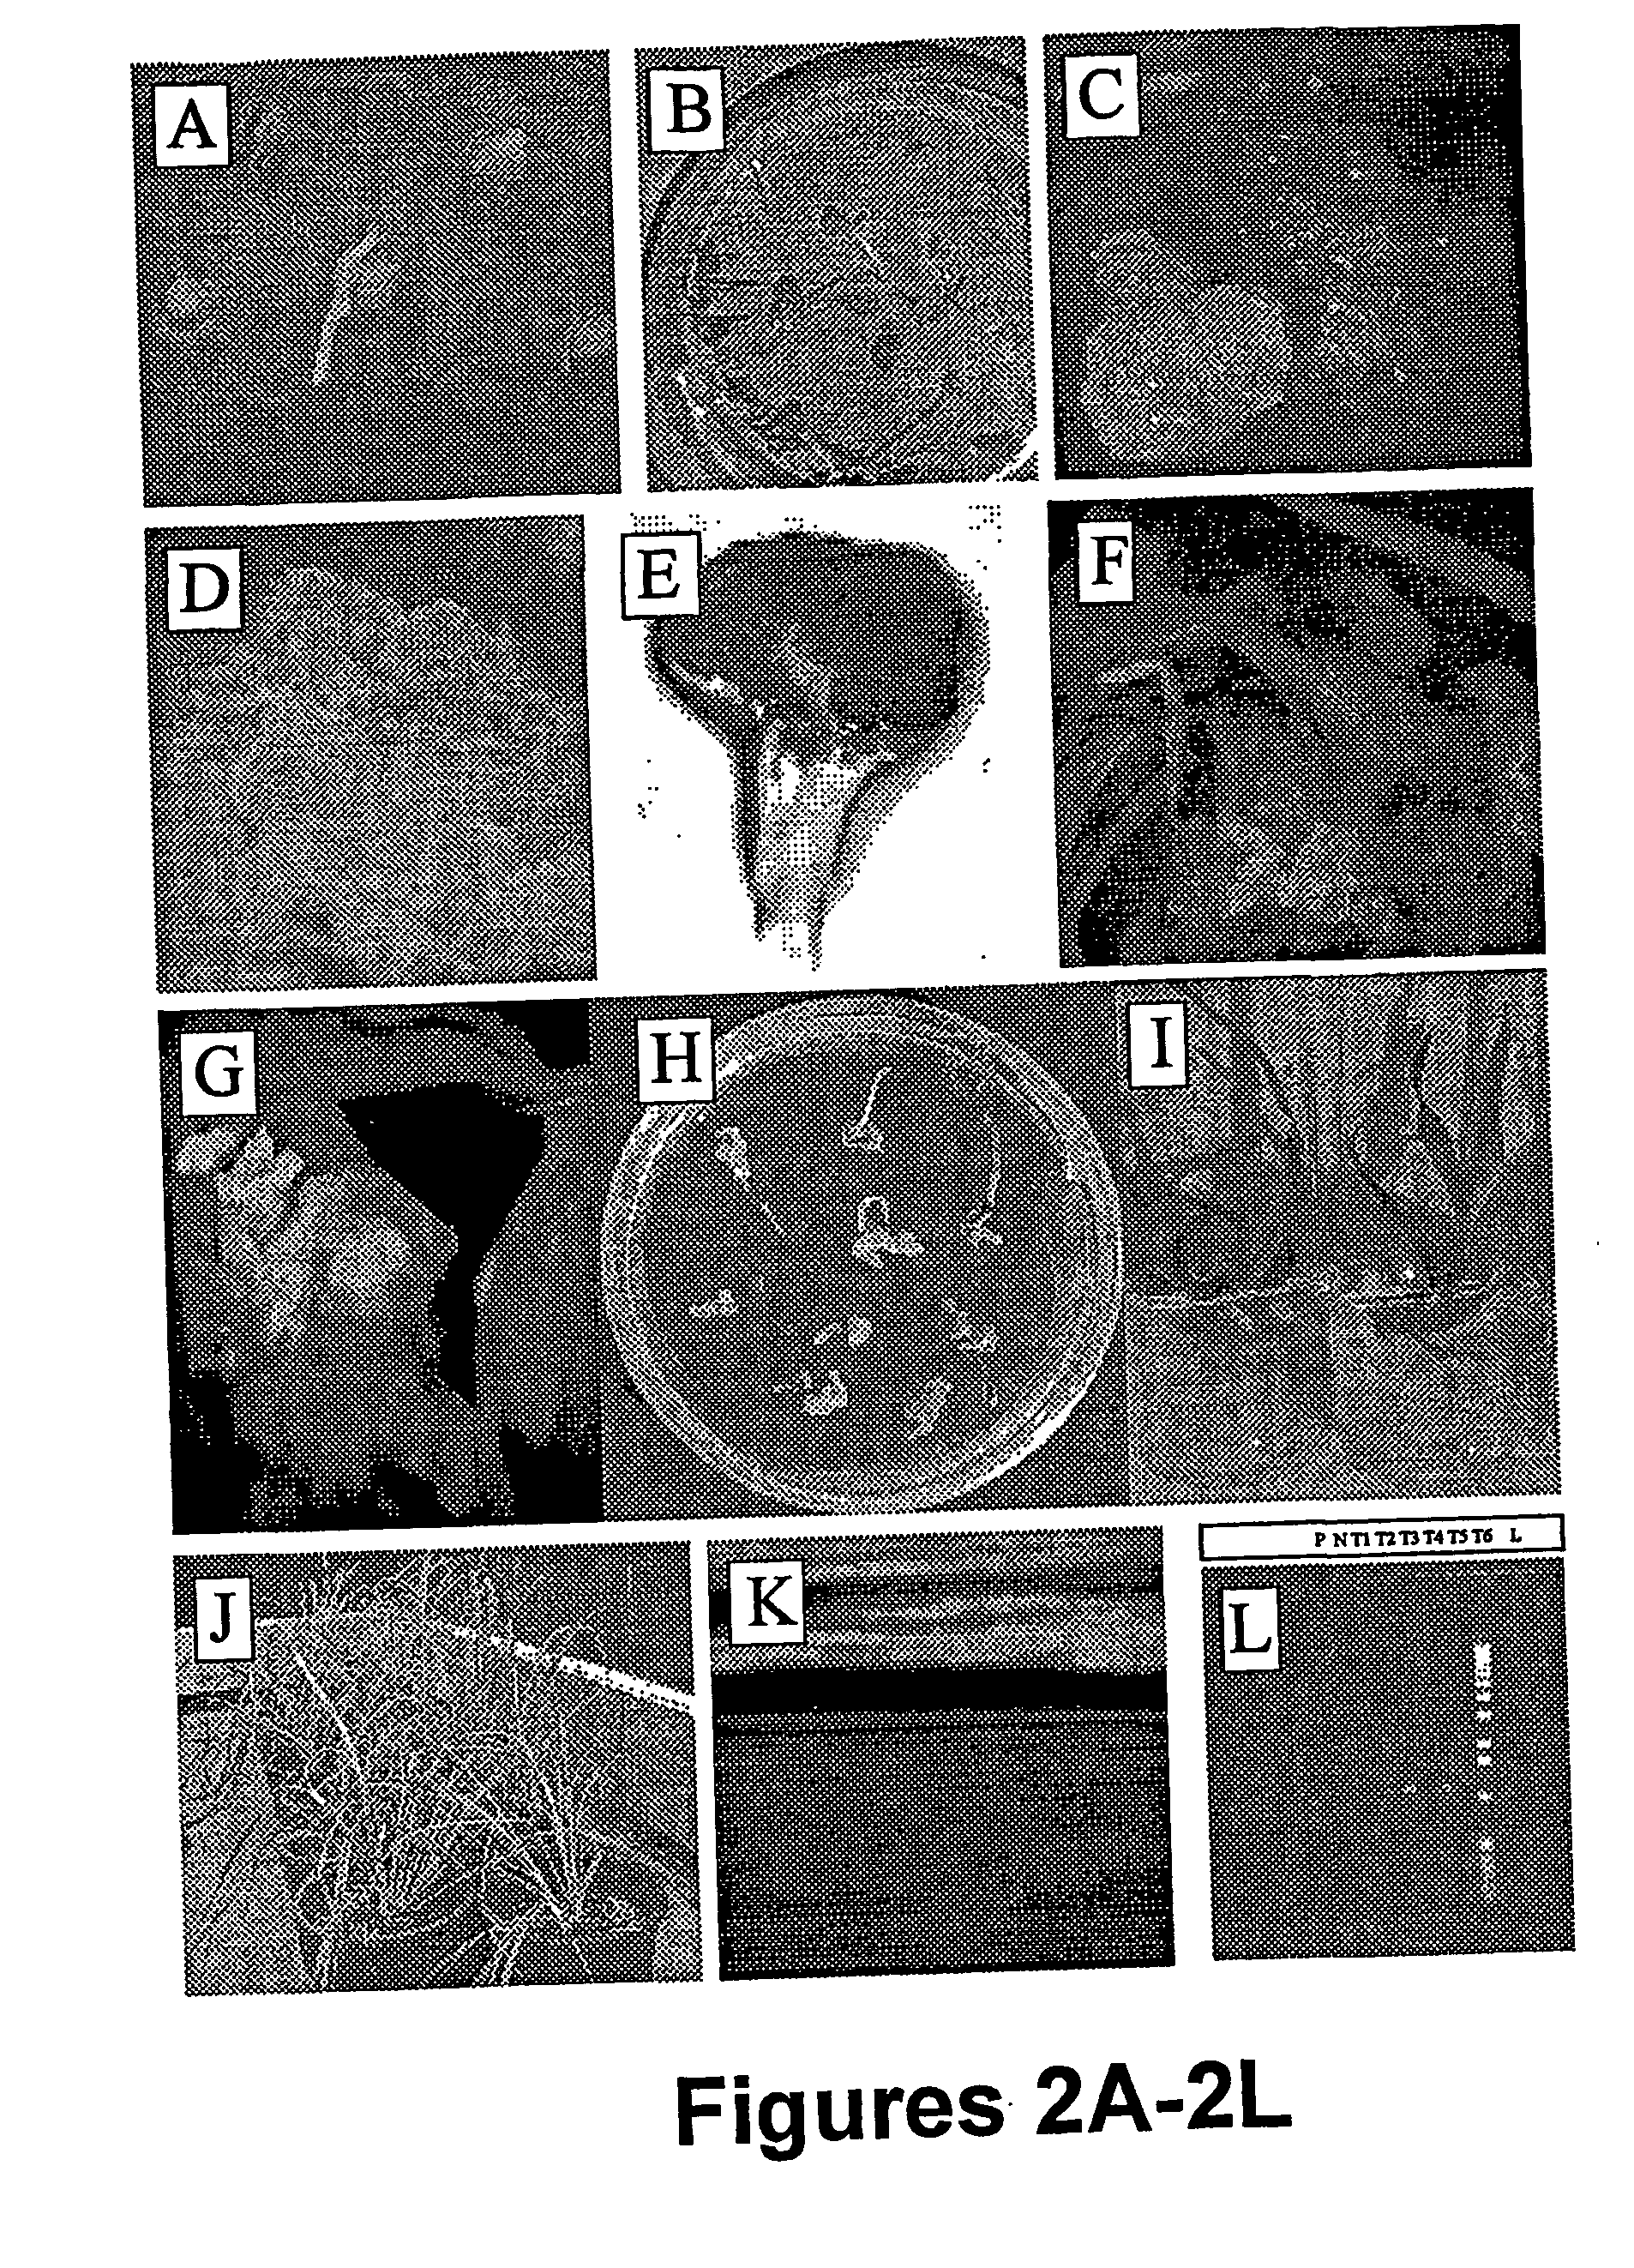 Method for transformation of mono-and di-cotyledonous plants using meristematic tissue and nodal callus from dicotyledonous plants